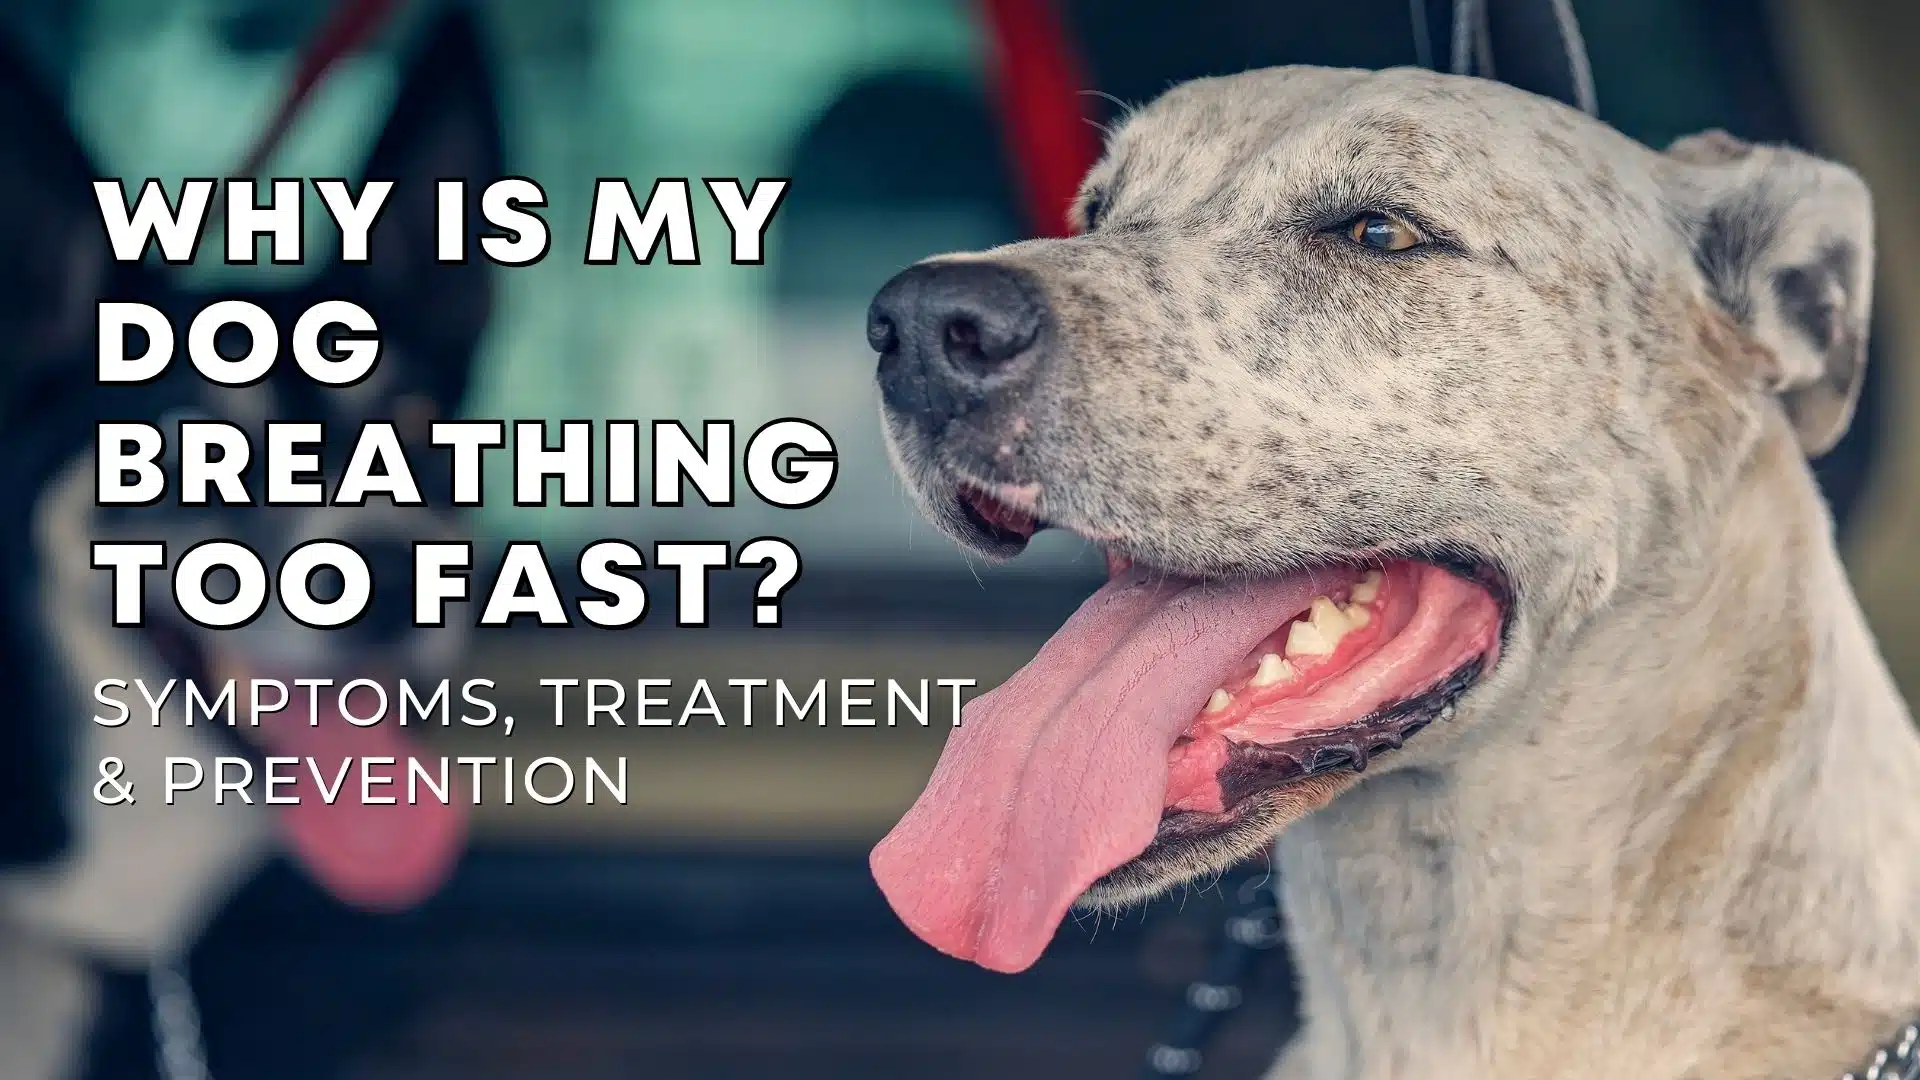 Why Is My Dog Breathing Too Fast? Symptoms, Treatment, and Prevention